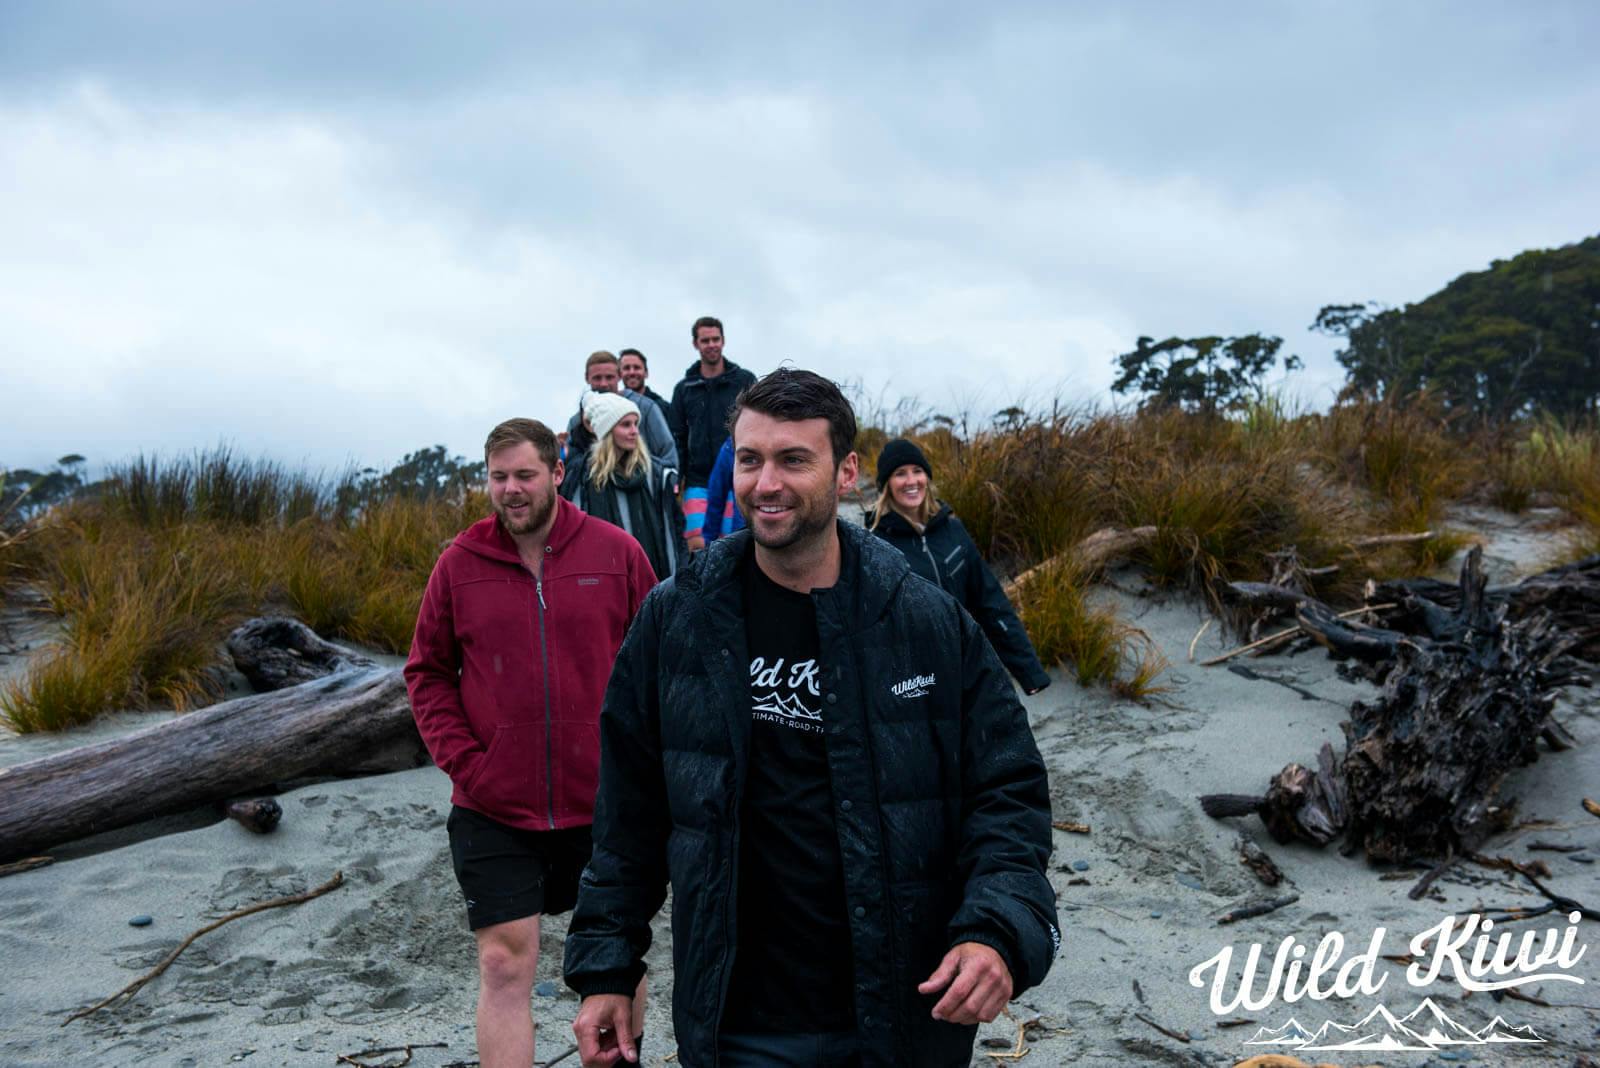 Community spirit on New Zealand tours - Meet up with great locals